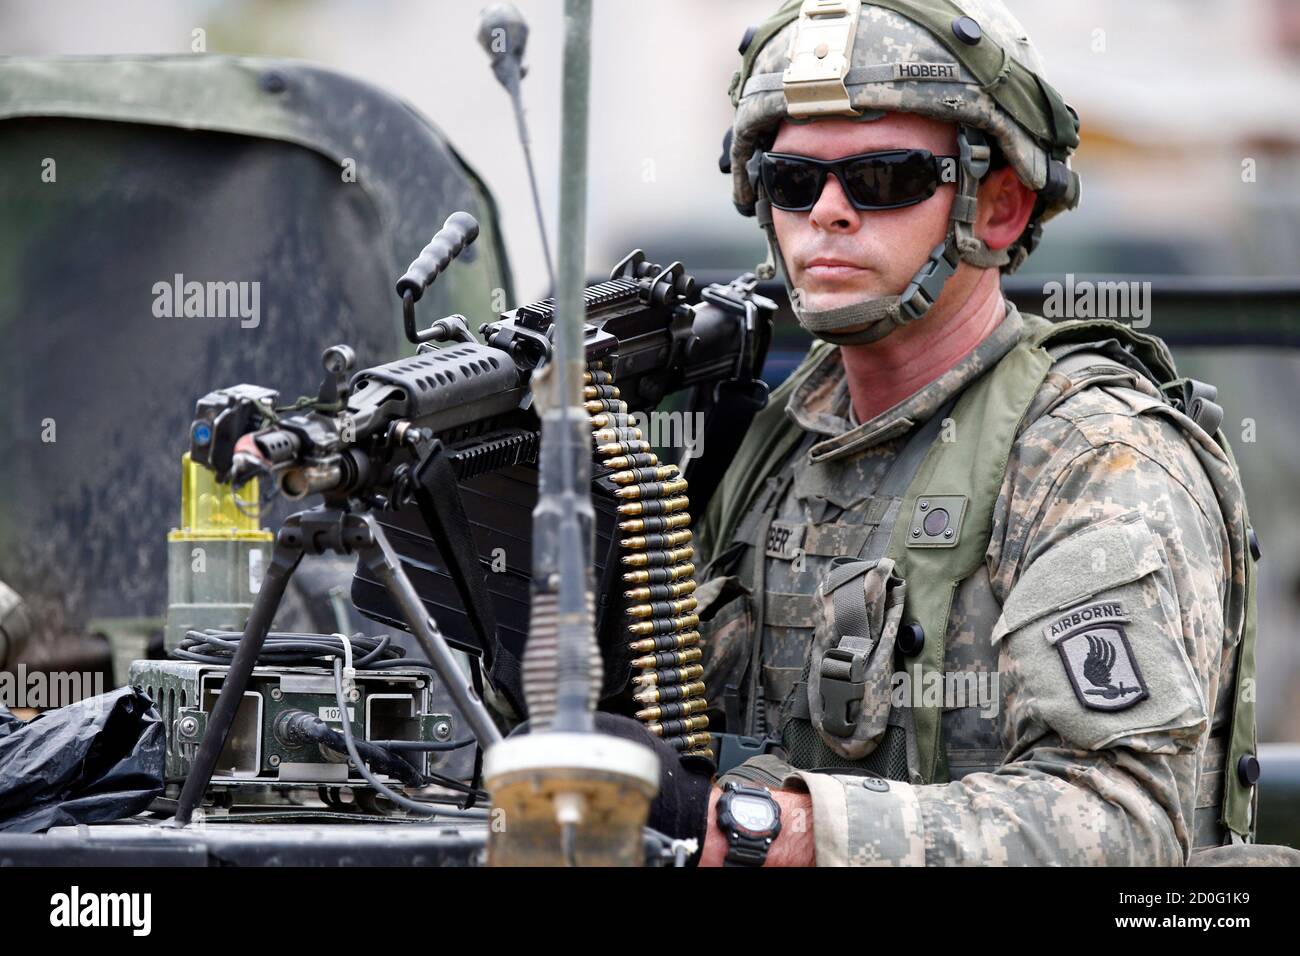 A NATO soldier takes part in a battle conducted exercise called ' Saber Junction Exercise' at the military ground in Hohenfels near Regensburg September 8, 2014. Saber Junction 14 is a U.S. Army Europe led, U.S. European Command directed, multinational, multiservice exercise that involves more than 5,800 personnel from 17 countries in several locations in Europe.   REUTERS/Michael Dalder (GERMANY - Tags: MILITARY) Stock Photo